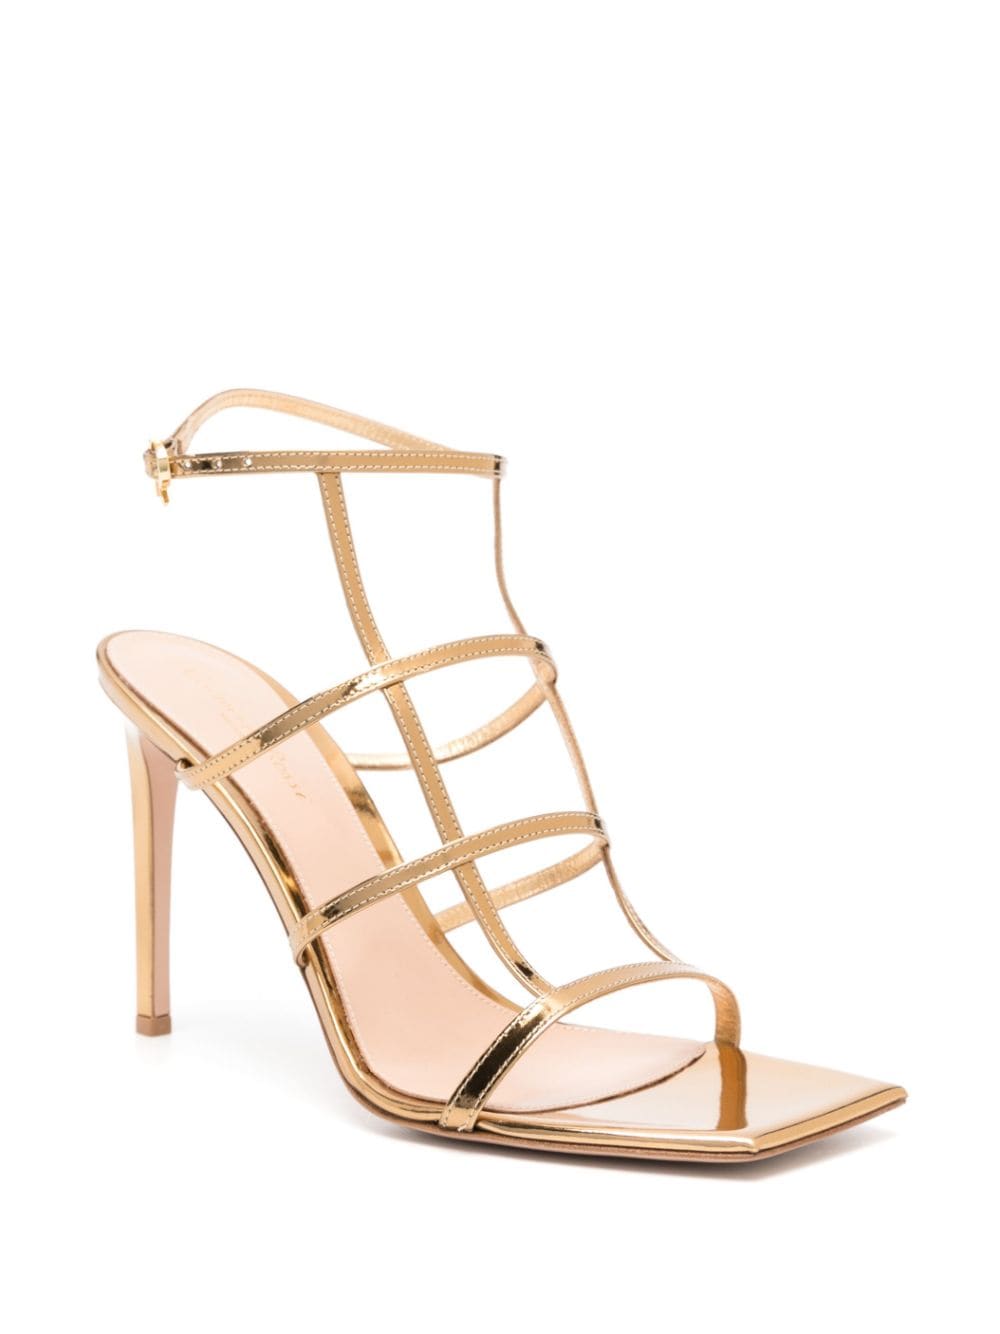 Shop Gianvito Rossi Mondry 95mm Leather Sandals In Gold